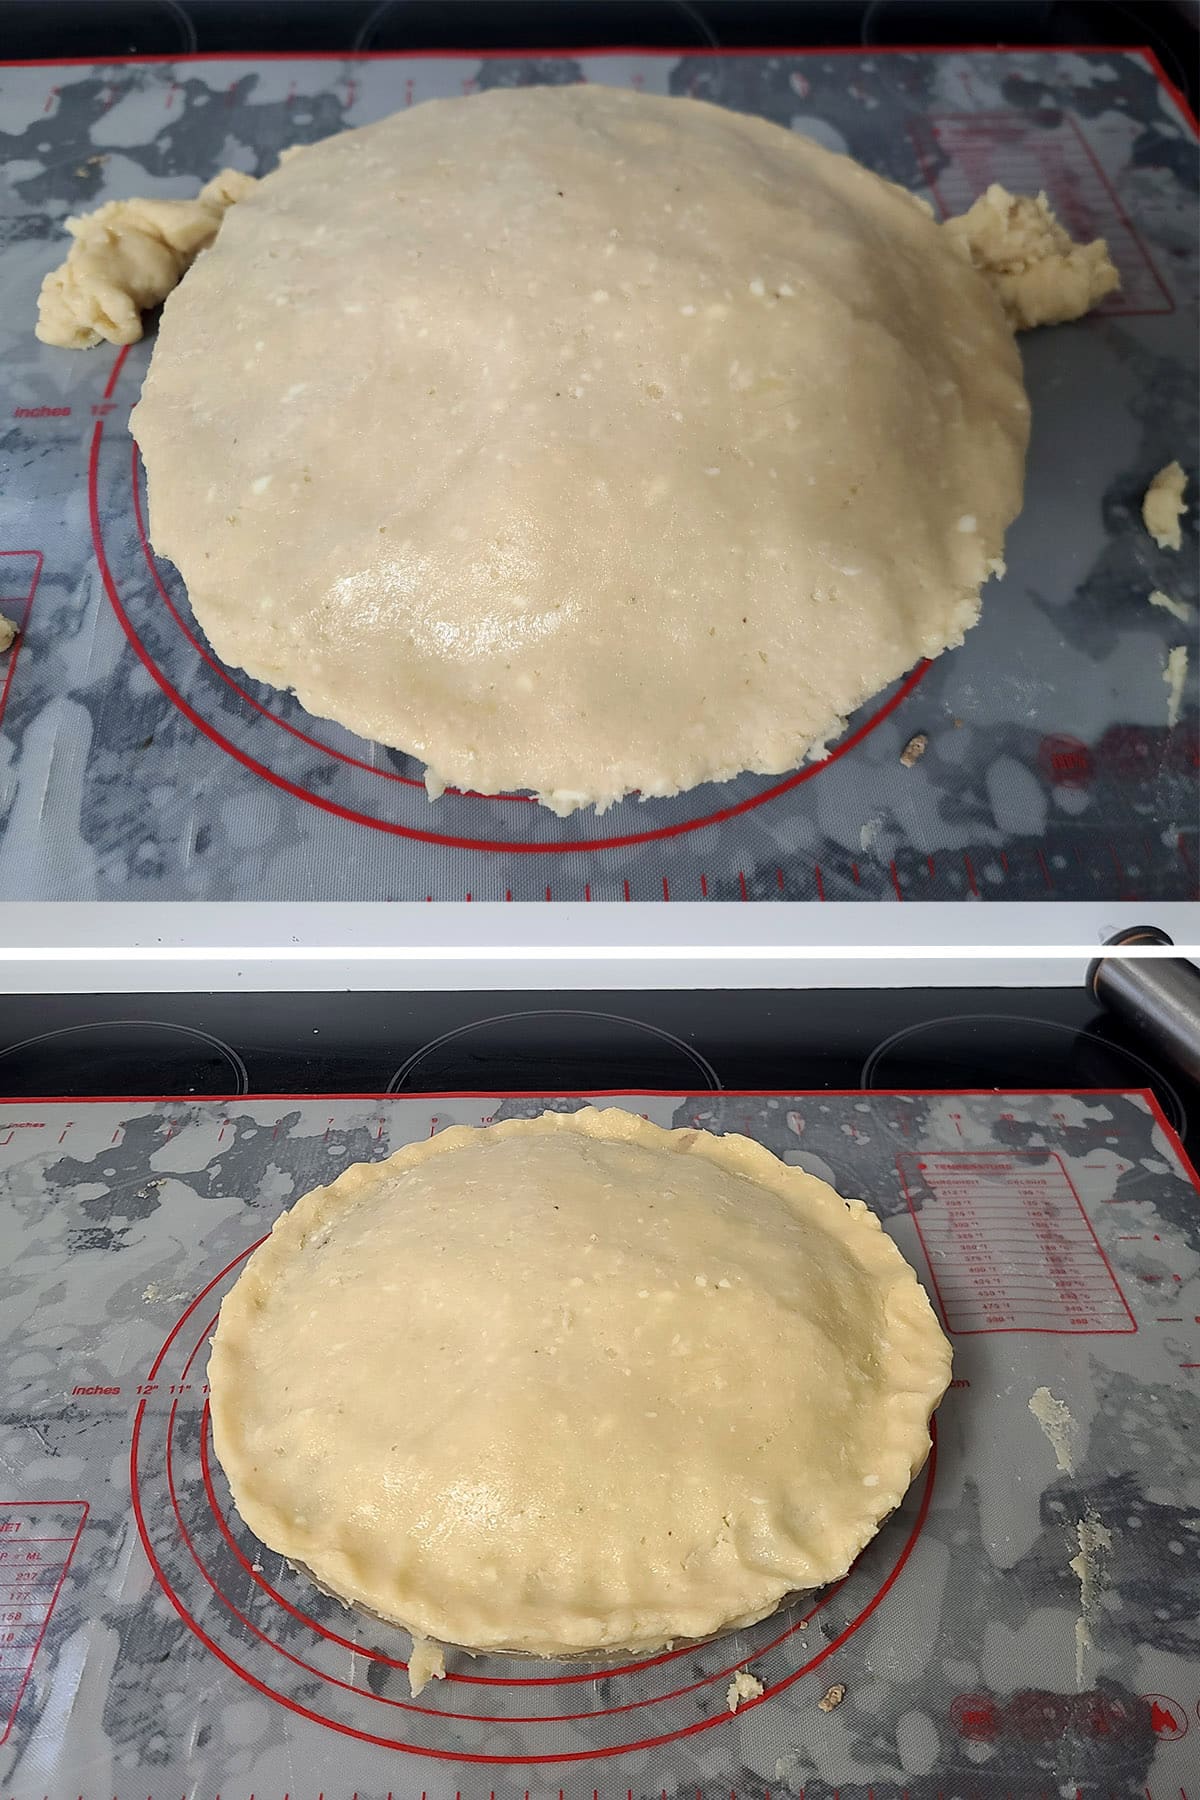 A 2 part image showing the pie crust being trimmed and fluted around the edge of the tourtiere.